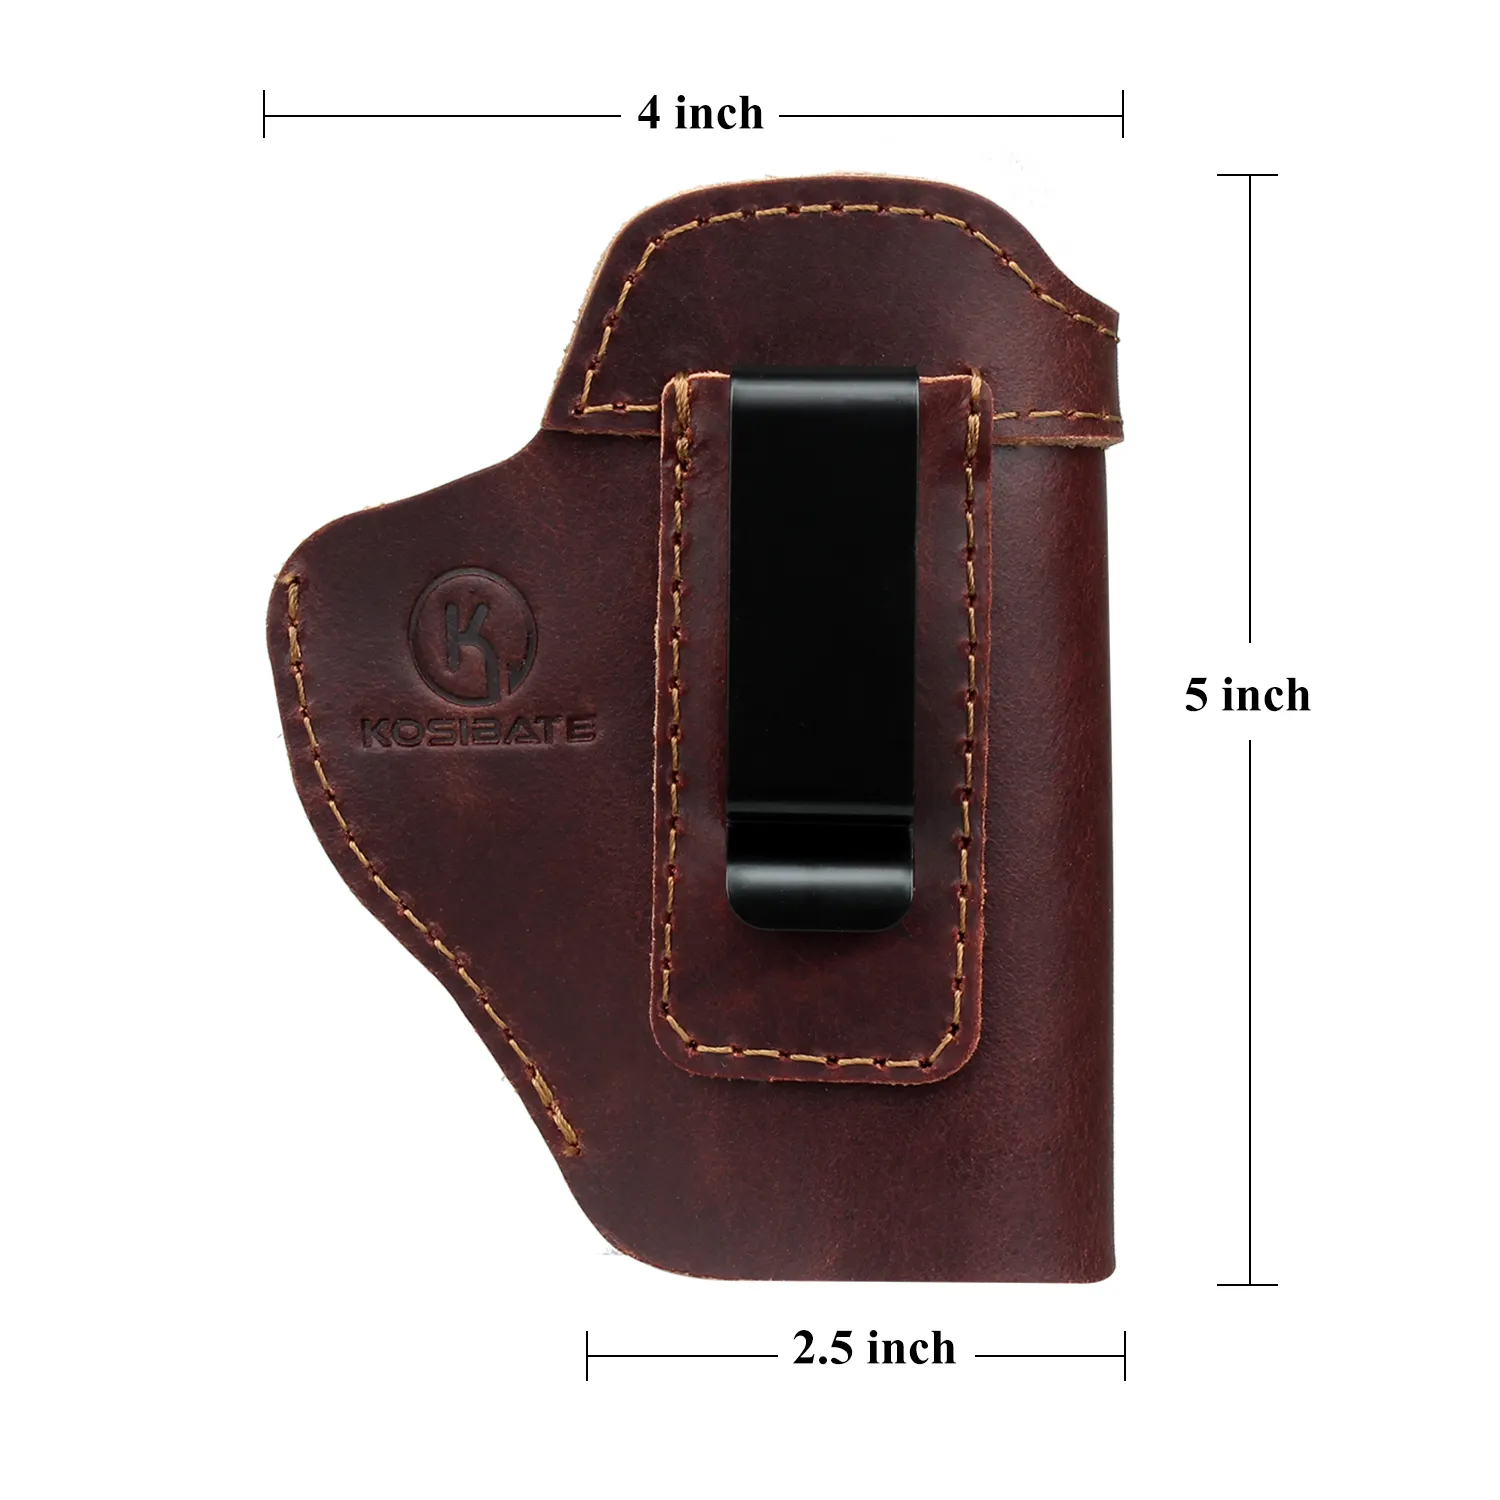 Tactical Gun Holster Leather Holster Concealed Gun Holster Bag for Hunting and Self-Defense